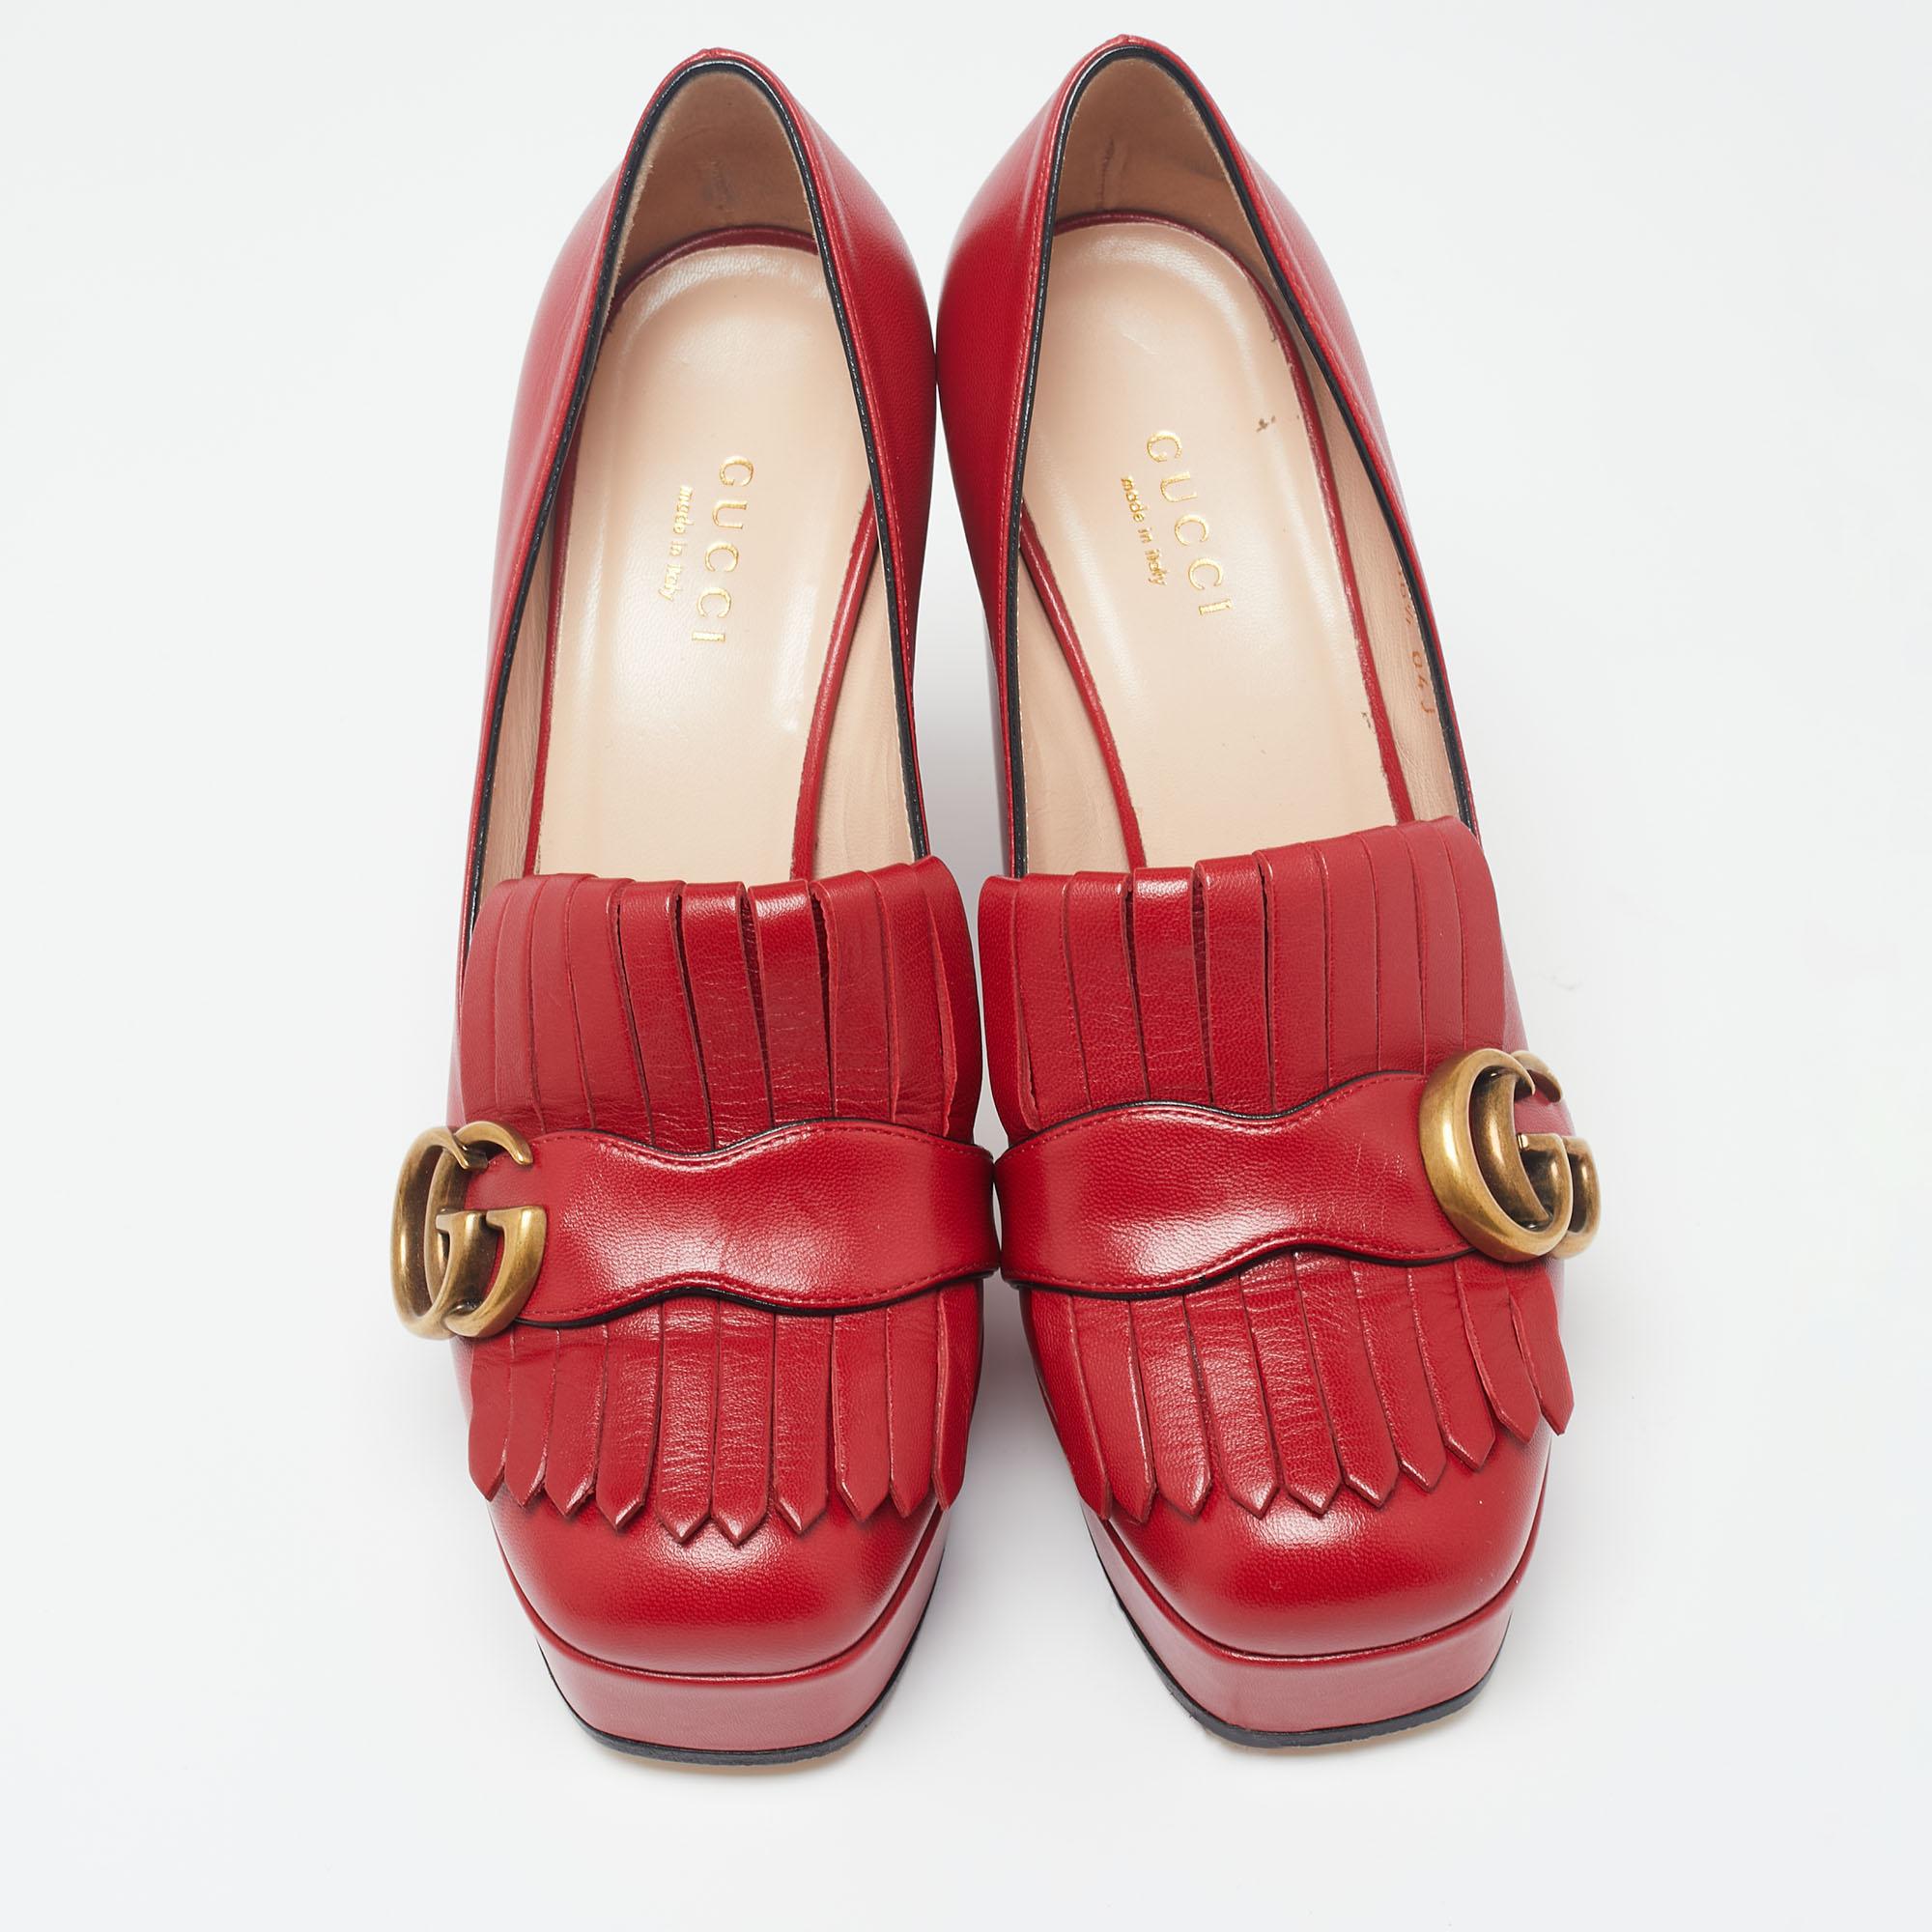 Gucci Red Leather GG Marmont Fringe Pumps Size 36.5 1